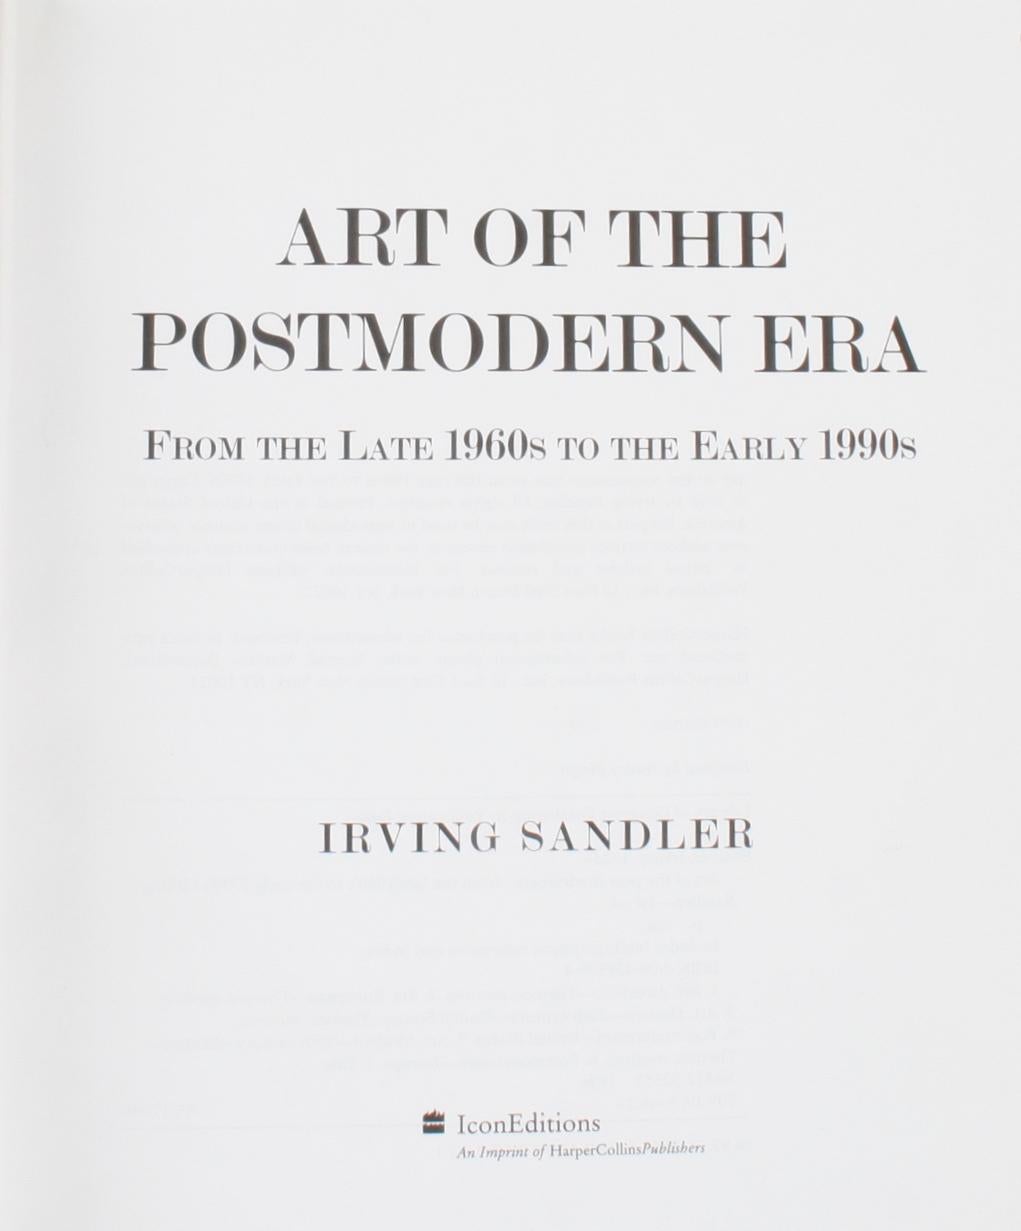 Art of the Postmodern era From The late 1960s to the Early 1990s by Irving Sandler. New York: Icon Editions, 1996. First edition hardcover with dust jacket. 636 pp. The fourth and final instalment in Irving Sandler's series on contemporary art. A